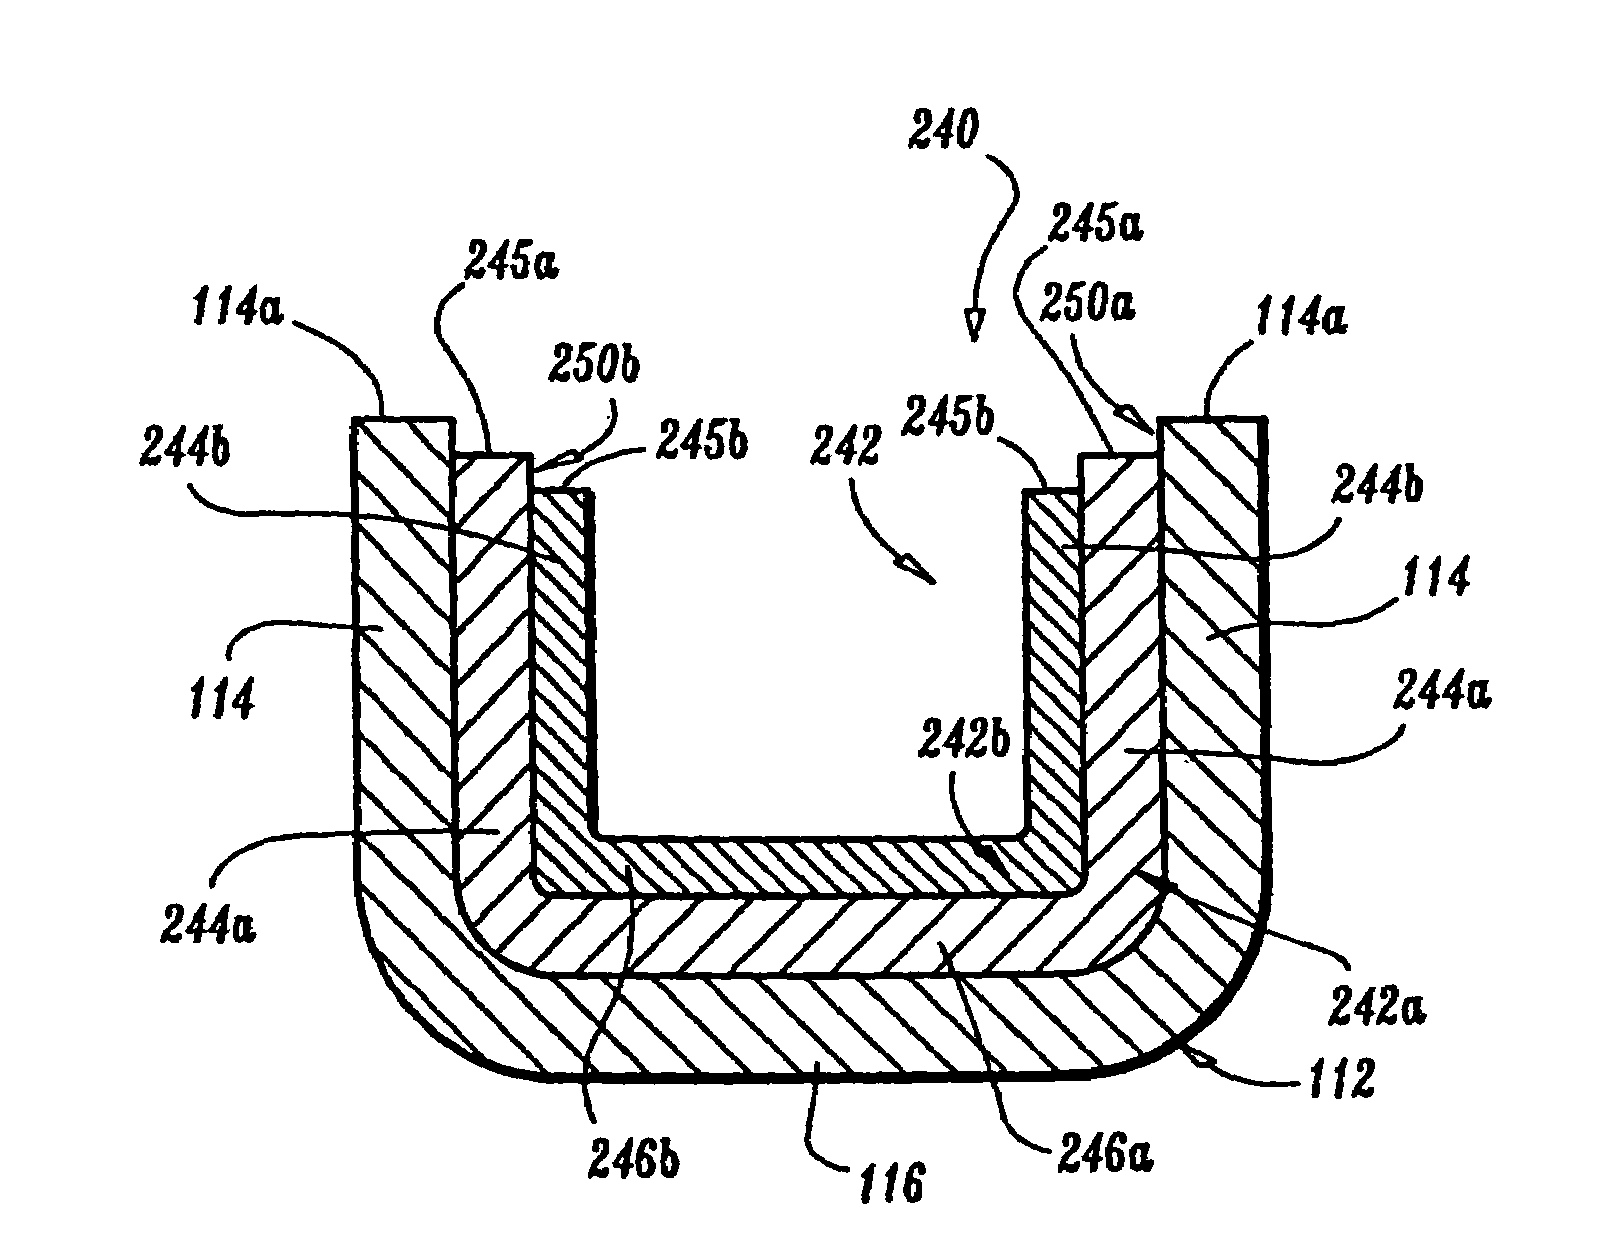 Surgical fastener applying apparatus with controlled beam deflection